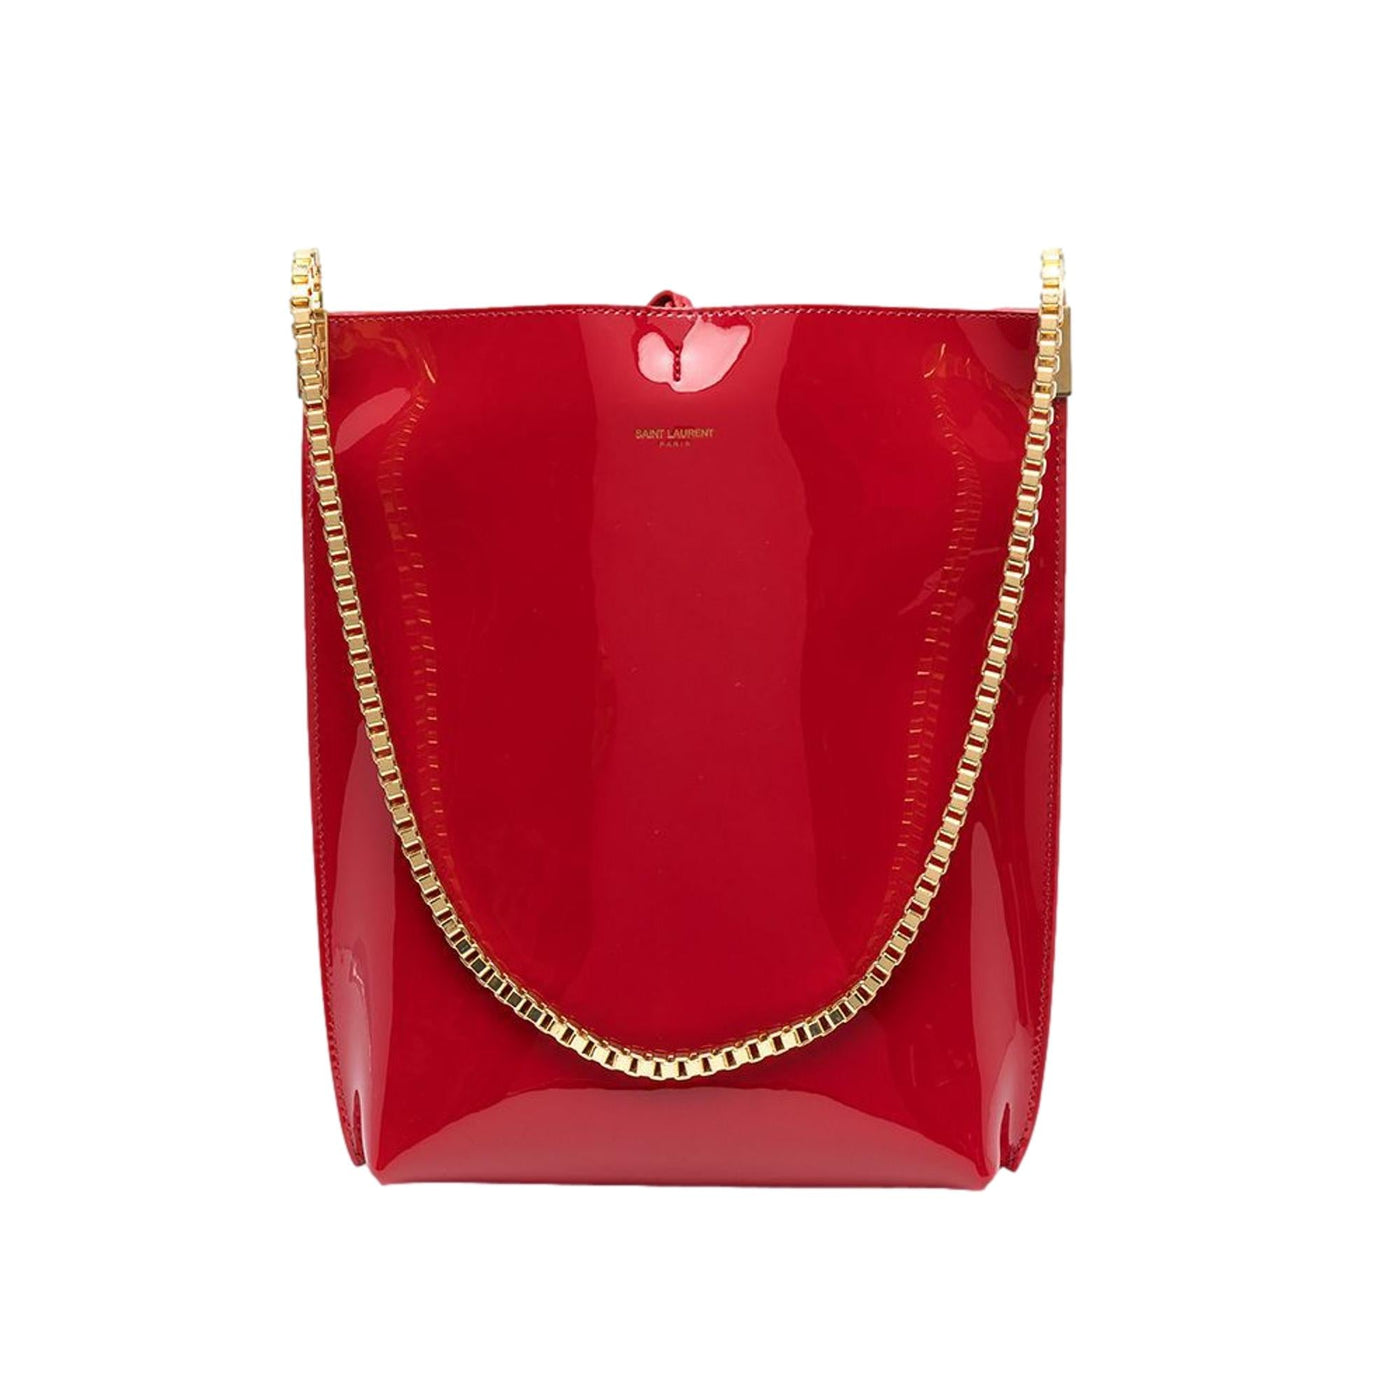 Saint Laurent Suzanne Red Patent Leather Small Chain Hobo Bag - LUXURYMRKT